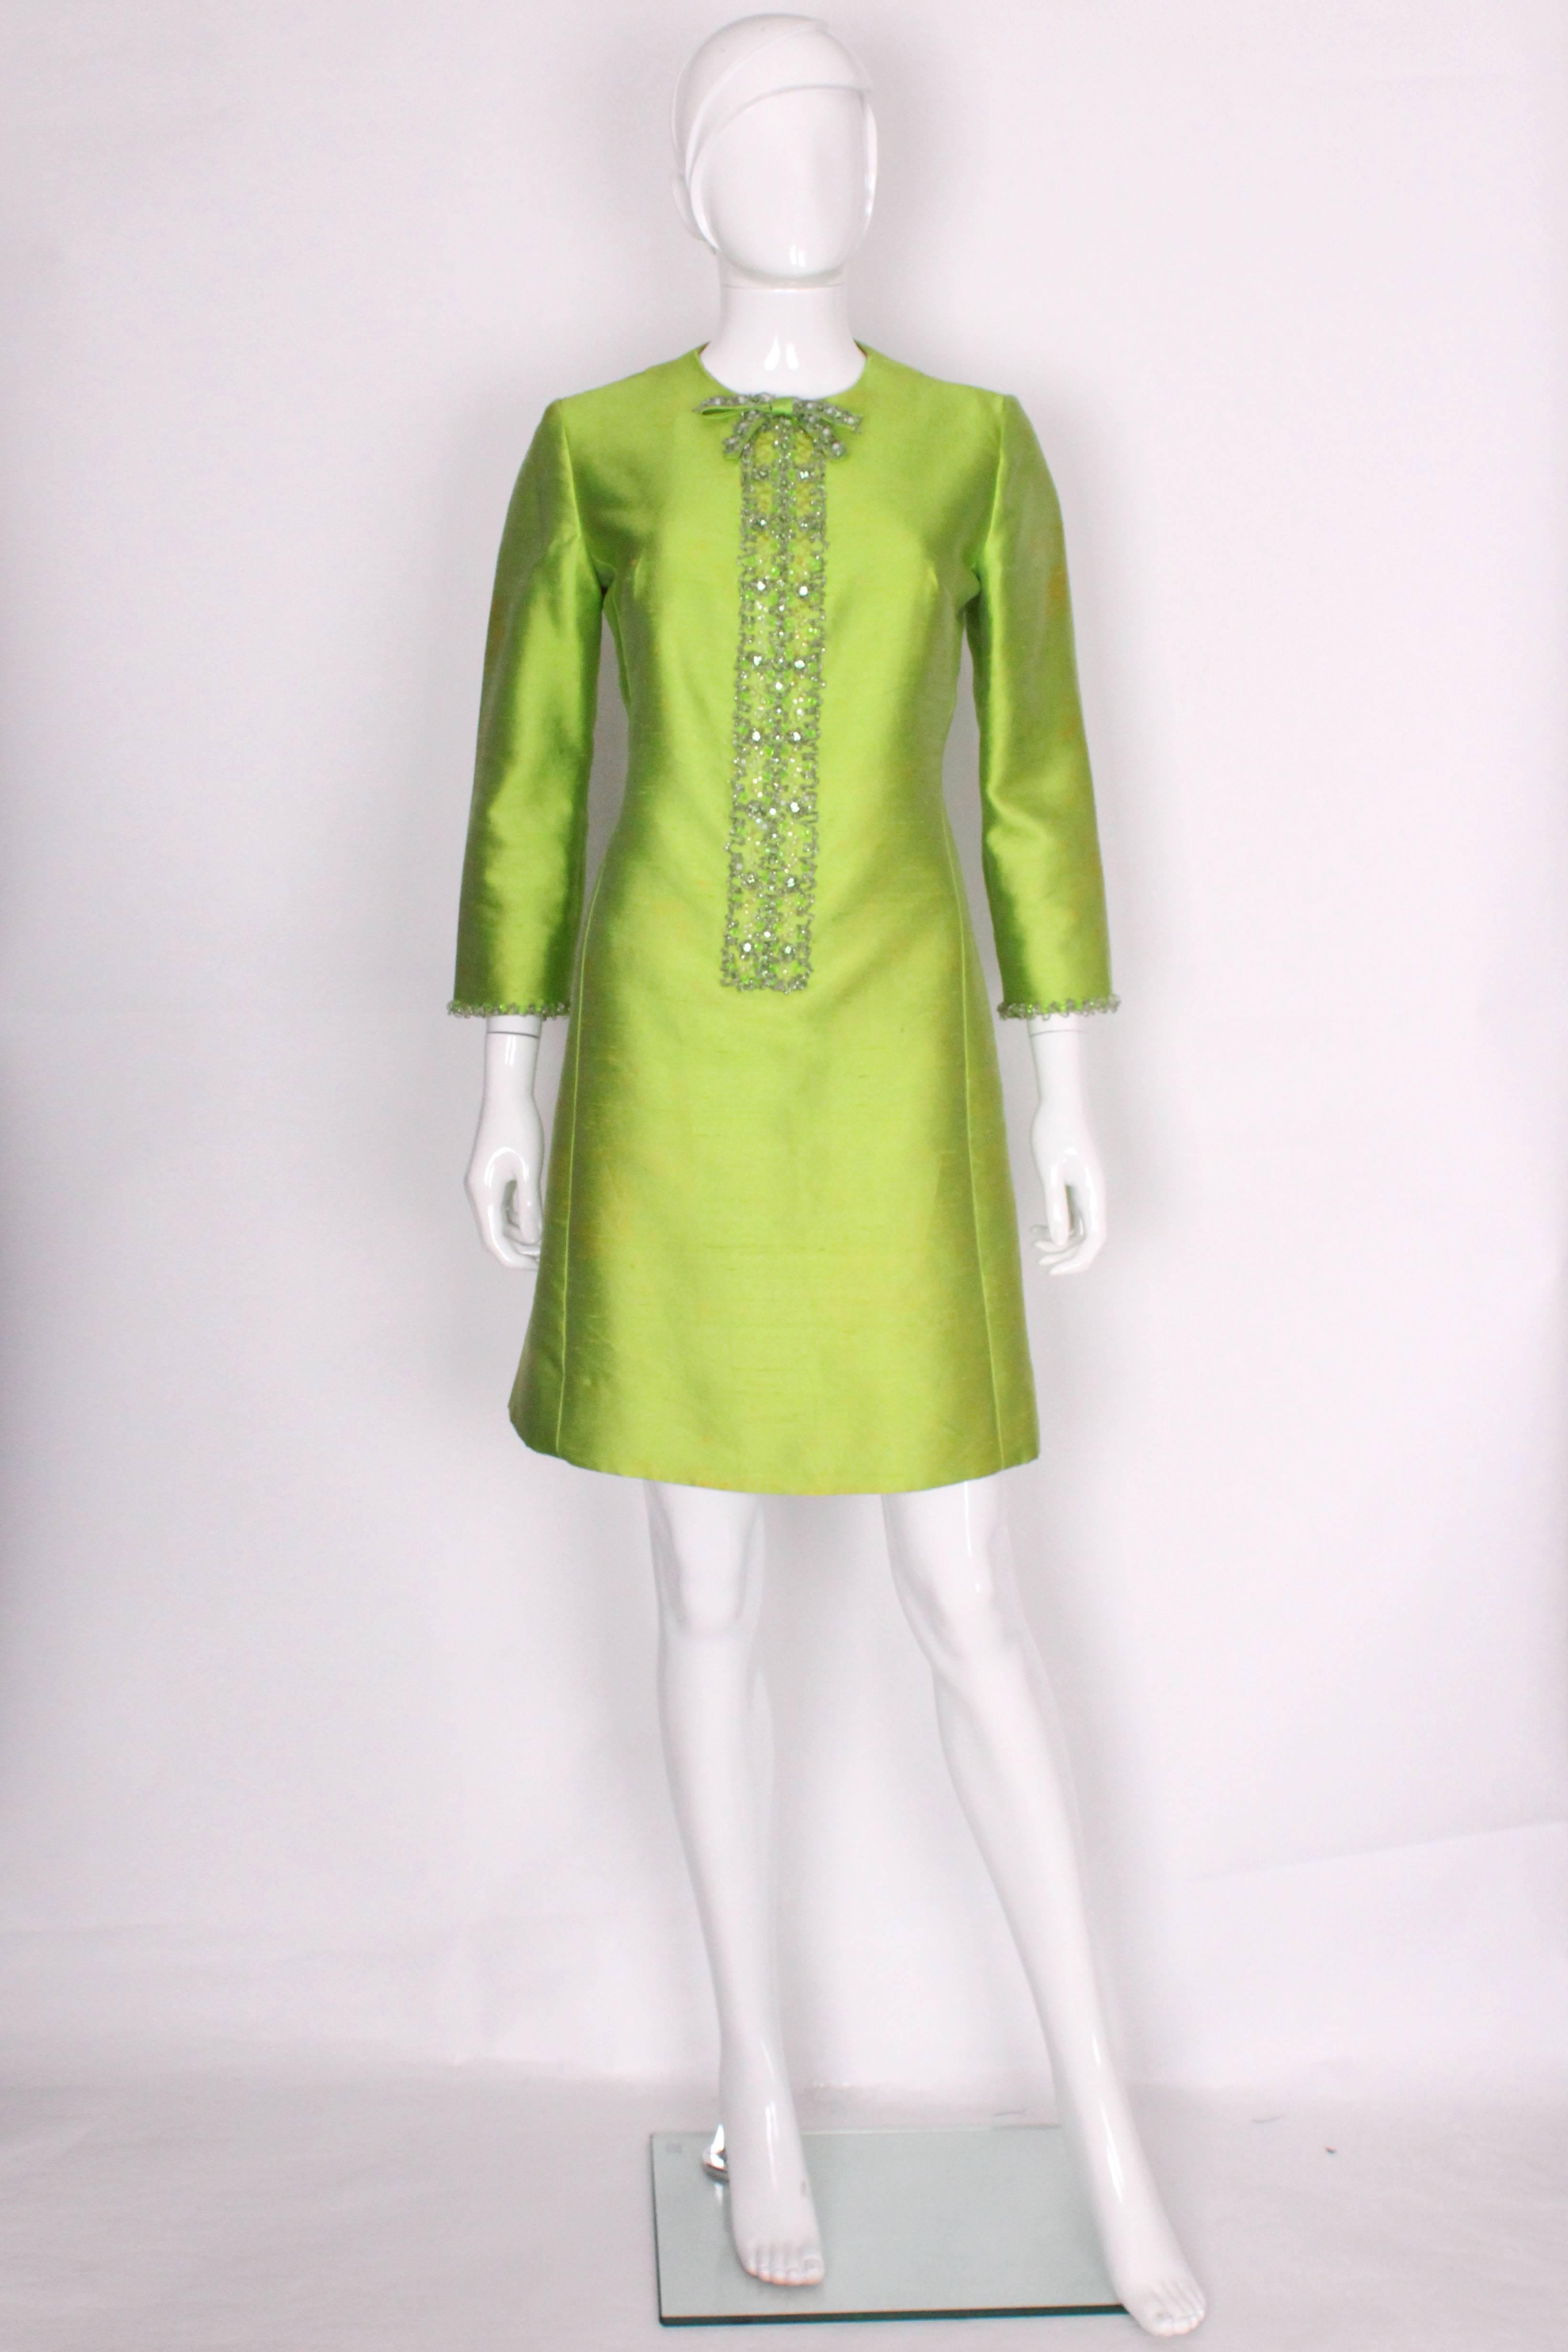 A great bold cocktail dress from the 1960s. In a stunning, eye-catching bright green slub silk with wonderful beadwork to the front and cuffs. The bib detail has a lovely bow at the top that is also embellished in beadwork. The colouring of the